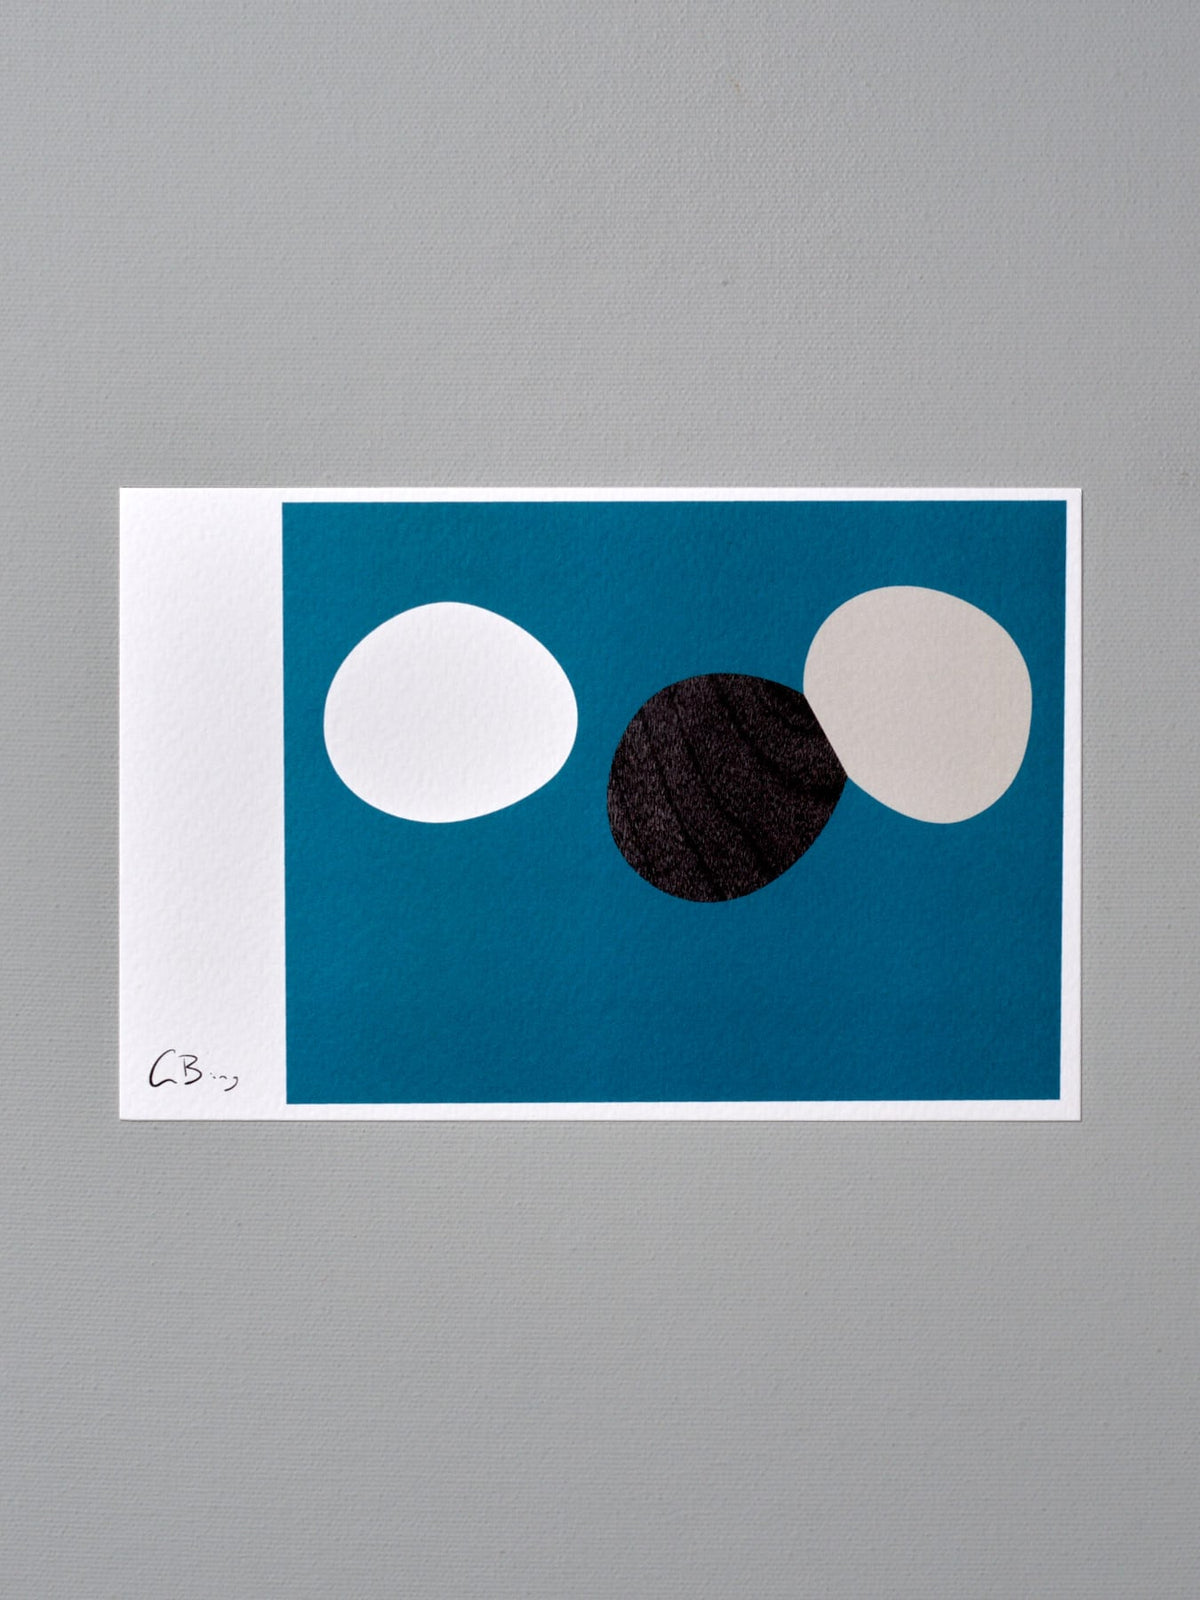 A Postcard Print - Anophase with black and white circles on a blue background by Gidon Bing.